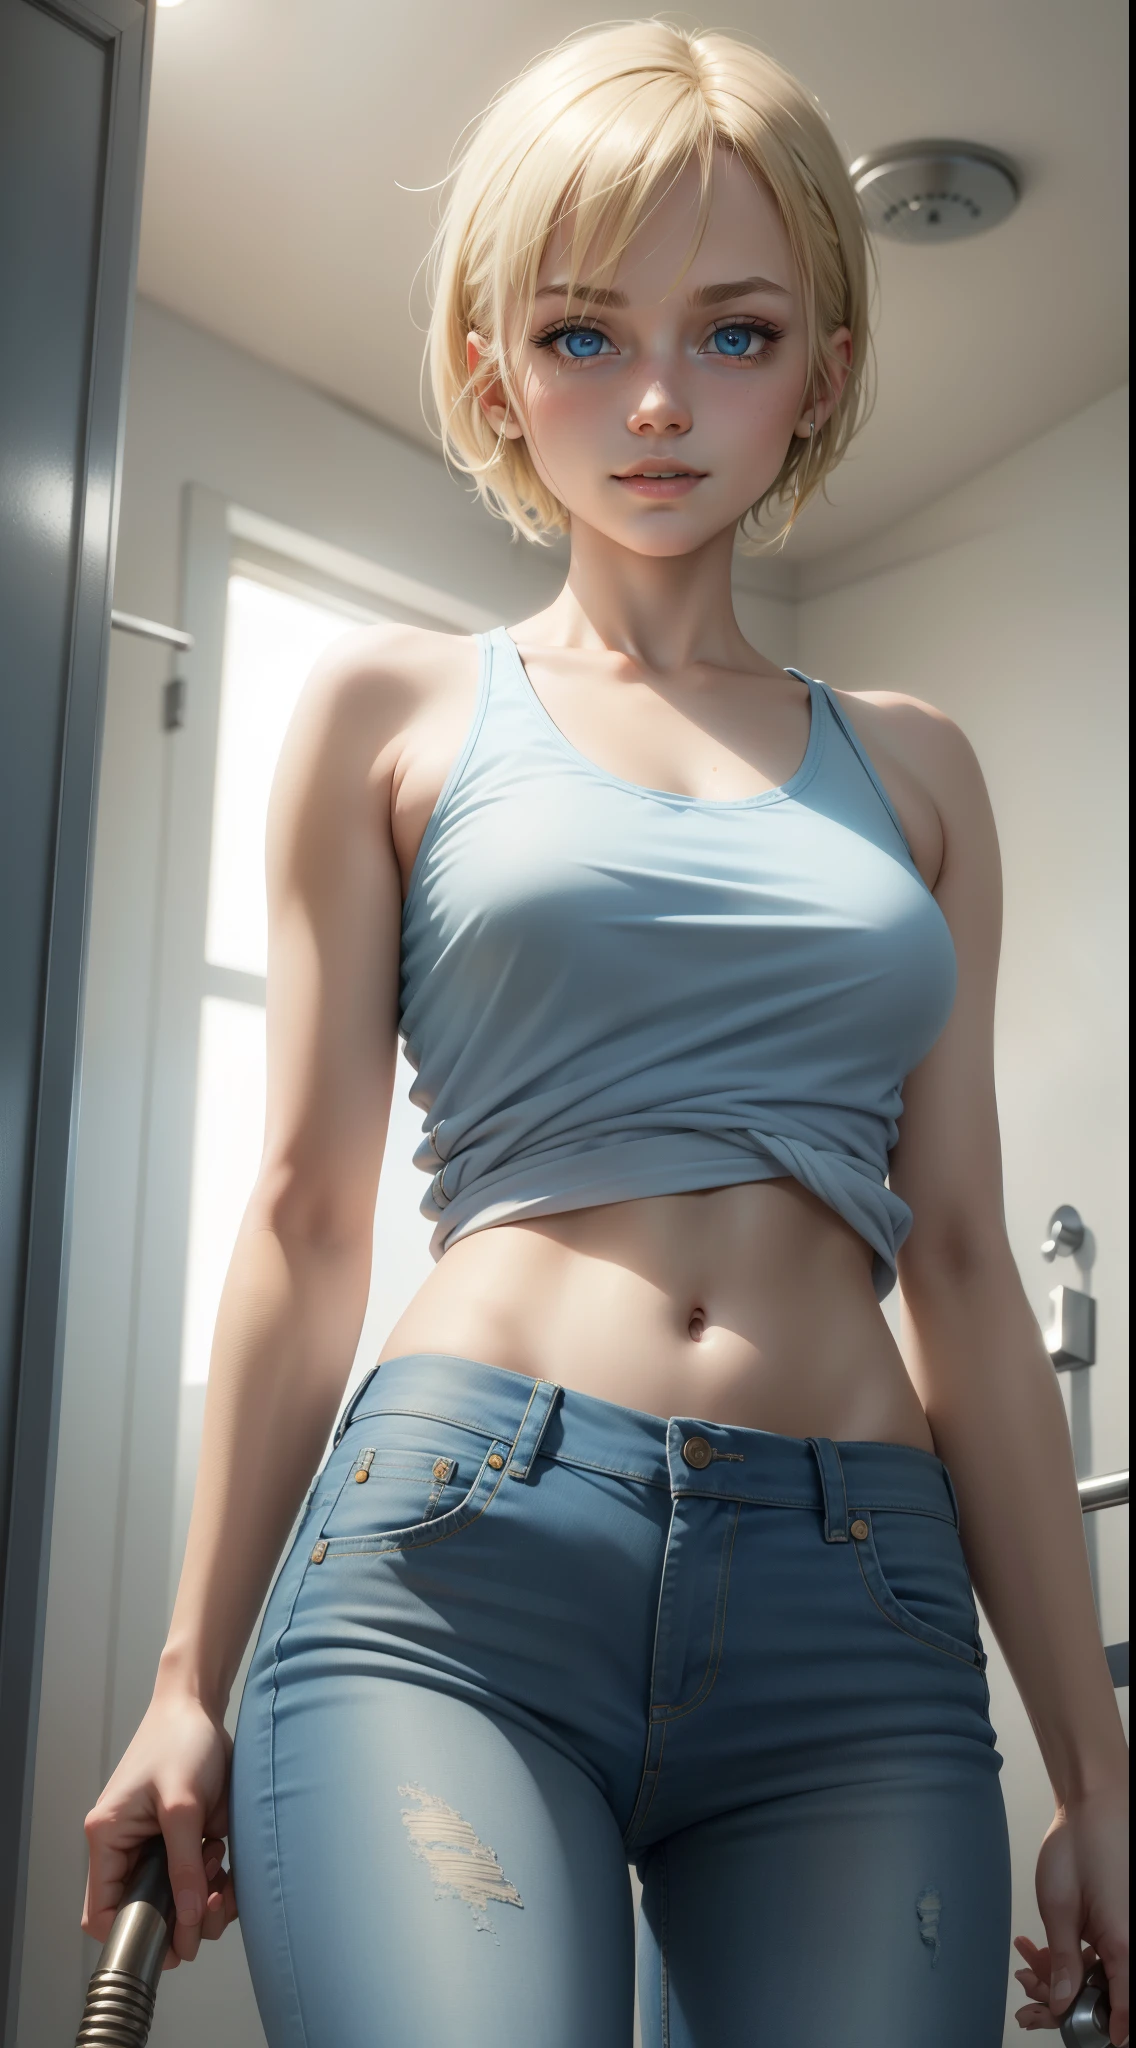 Young girls, blond with short hair, high ponytails, eBlue eyes, ssmile, Blue skinny shirt, denim pant, open shower room, Two swords, fly by rope, tmasterpiece, high high quality, 4K, k hd, Nice details